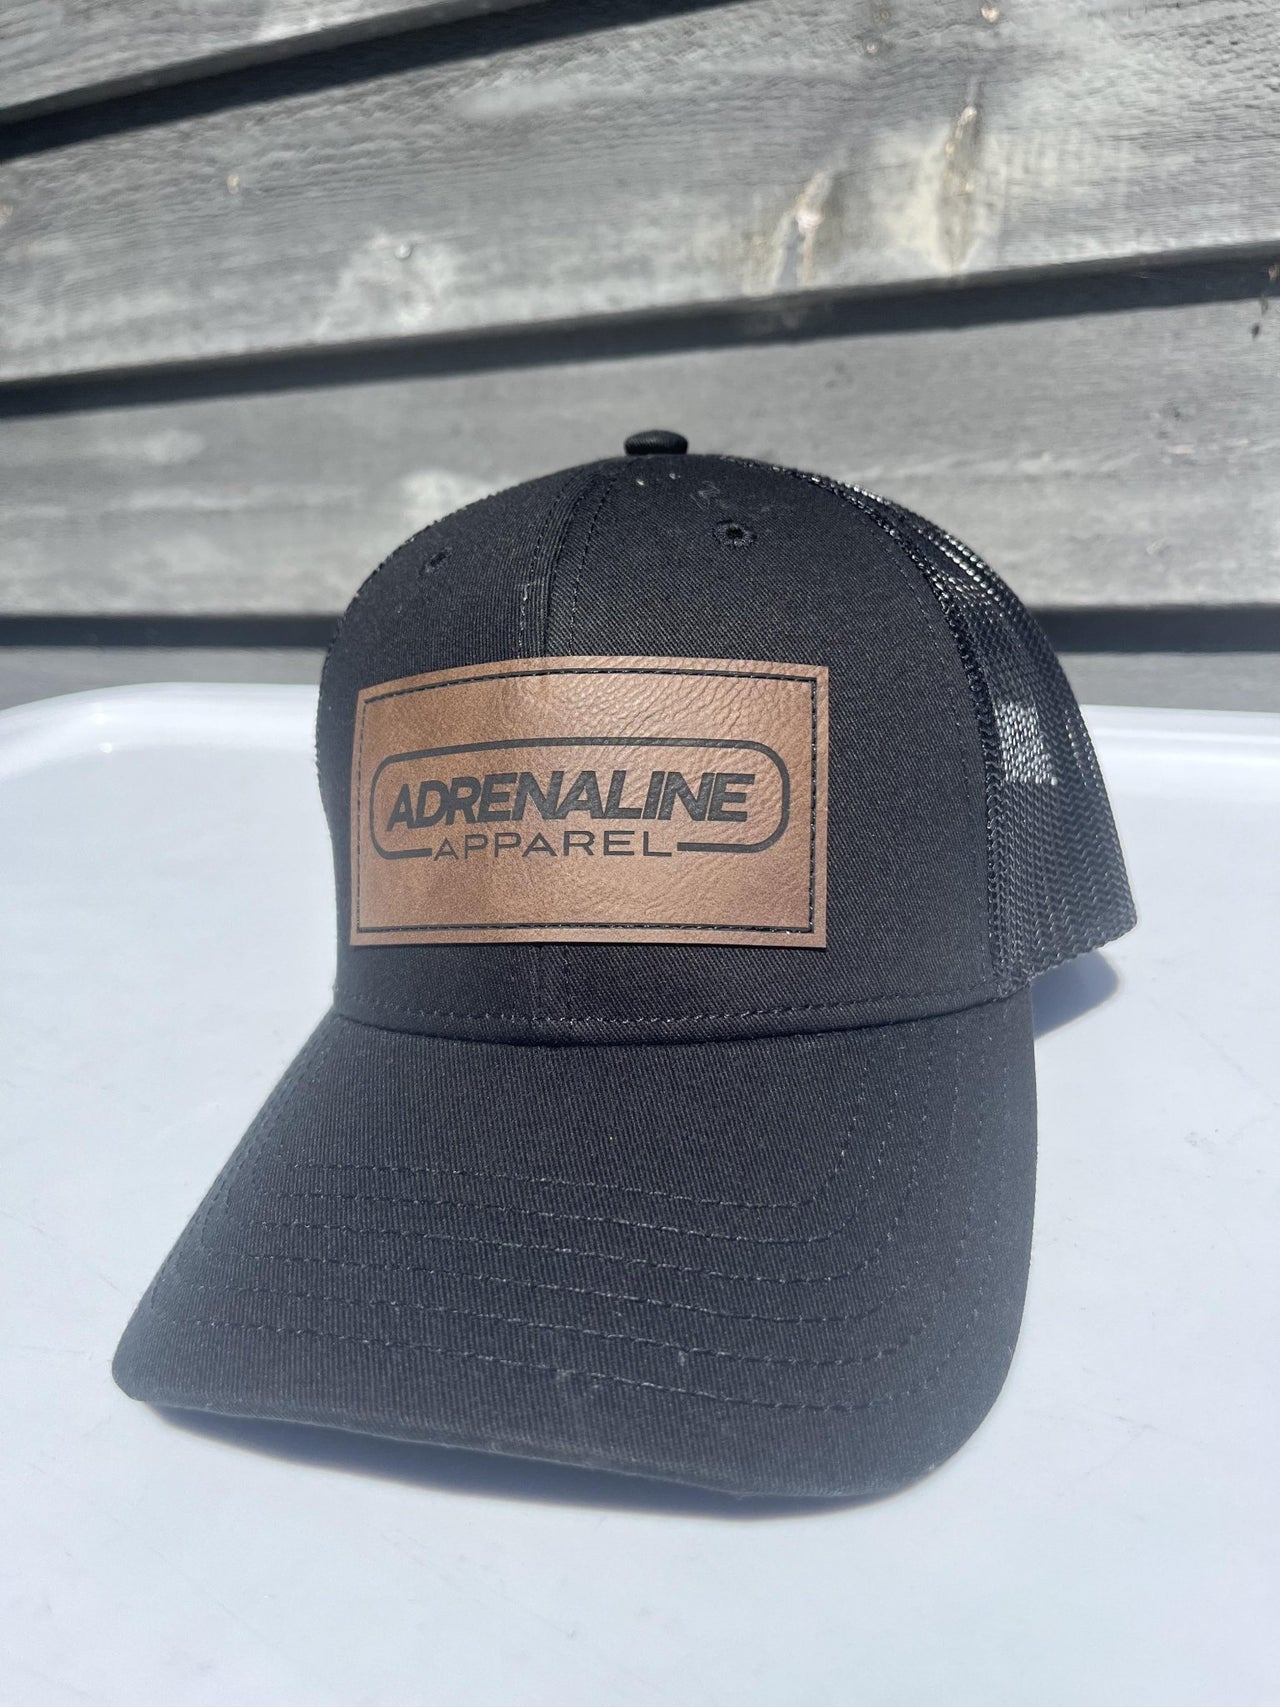 NEW Hat - Leather Badge - AdrenalineApparel